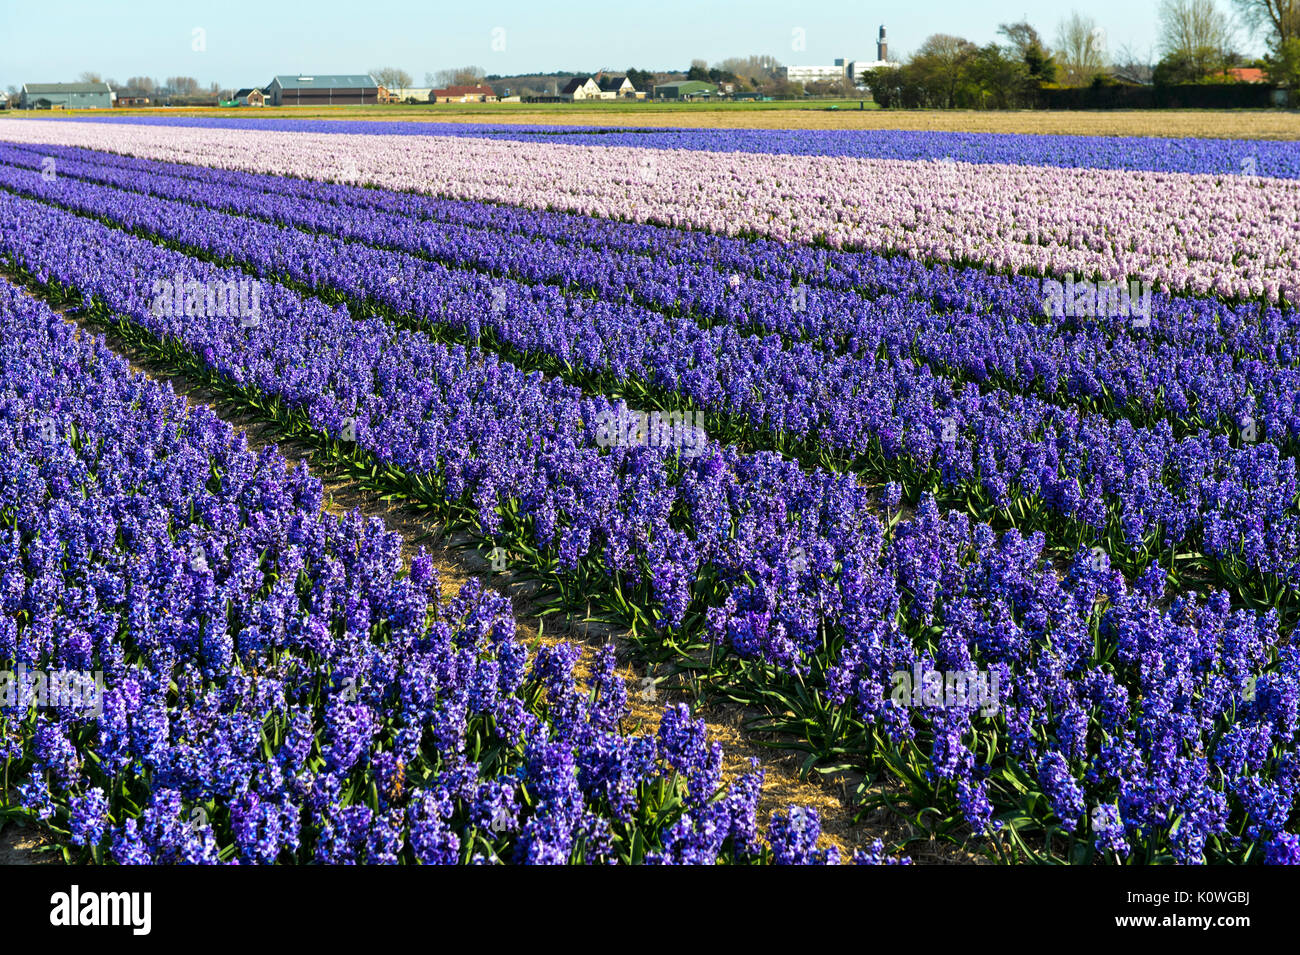 Field with blooming hyacinths, Bollenstreek region, South-Holland, Netherlands Stock Photo